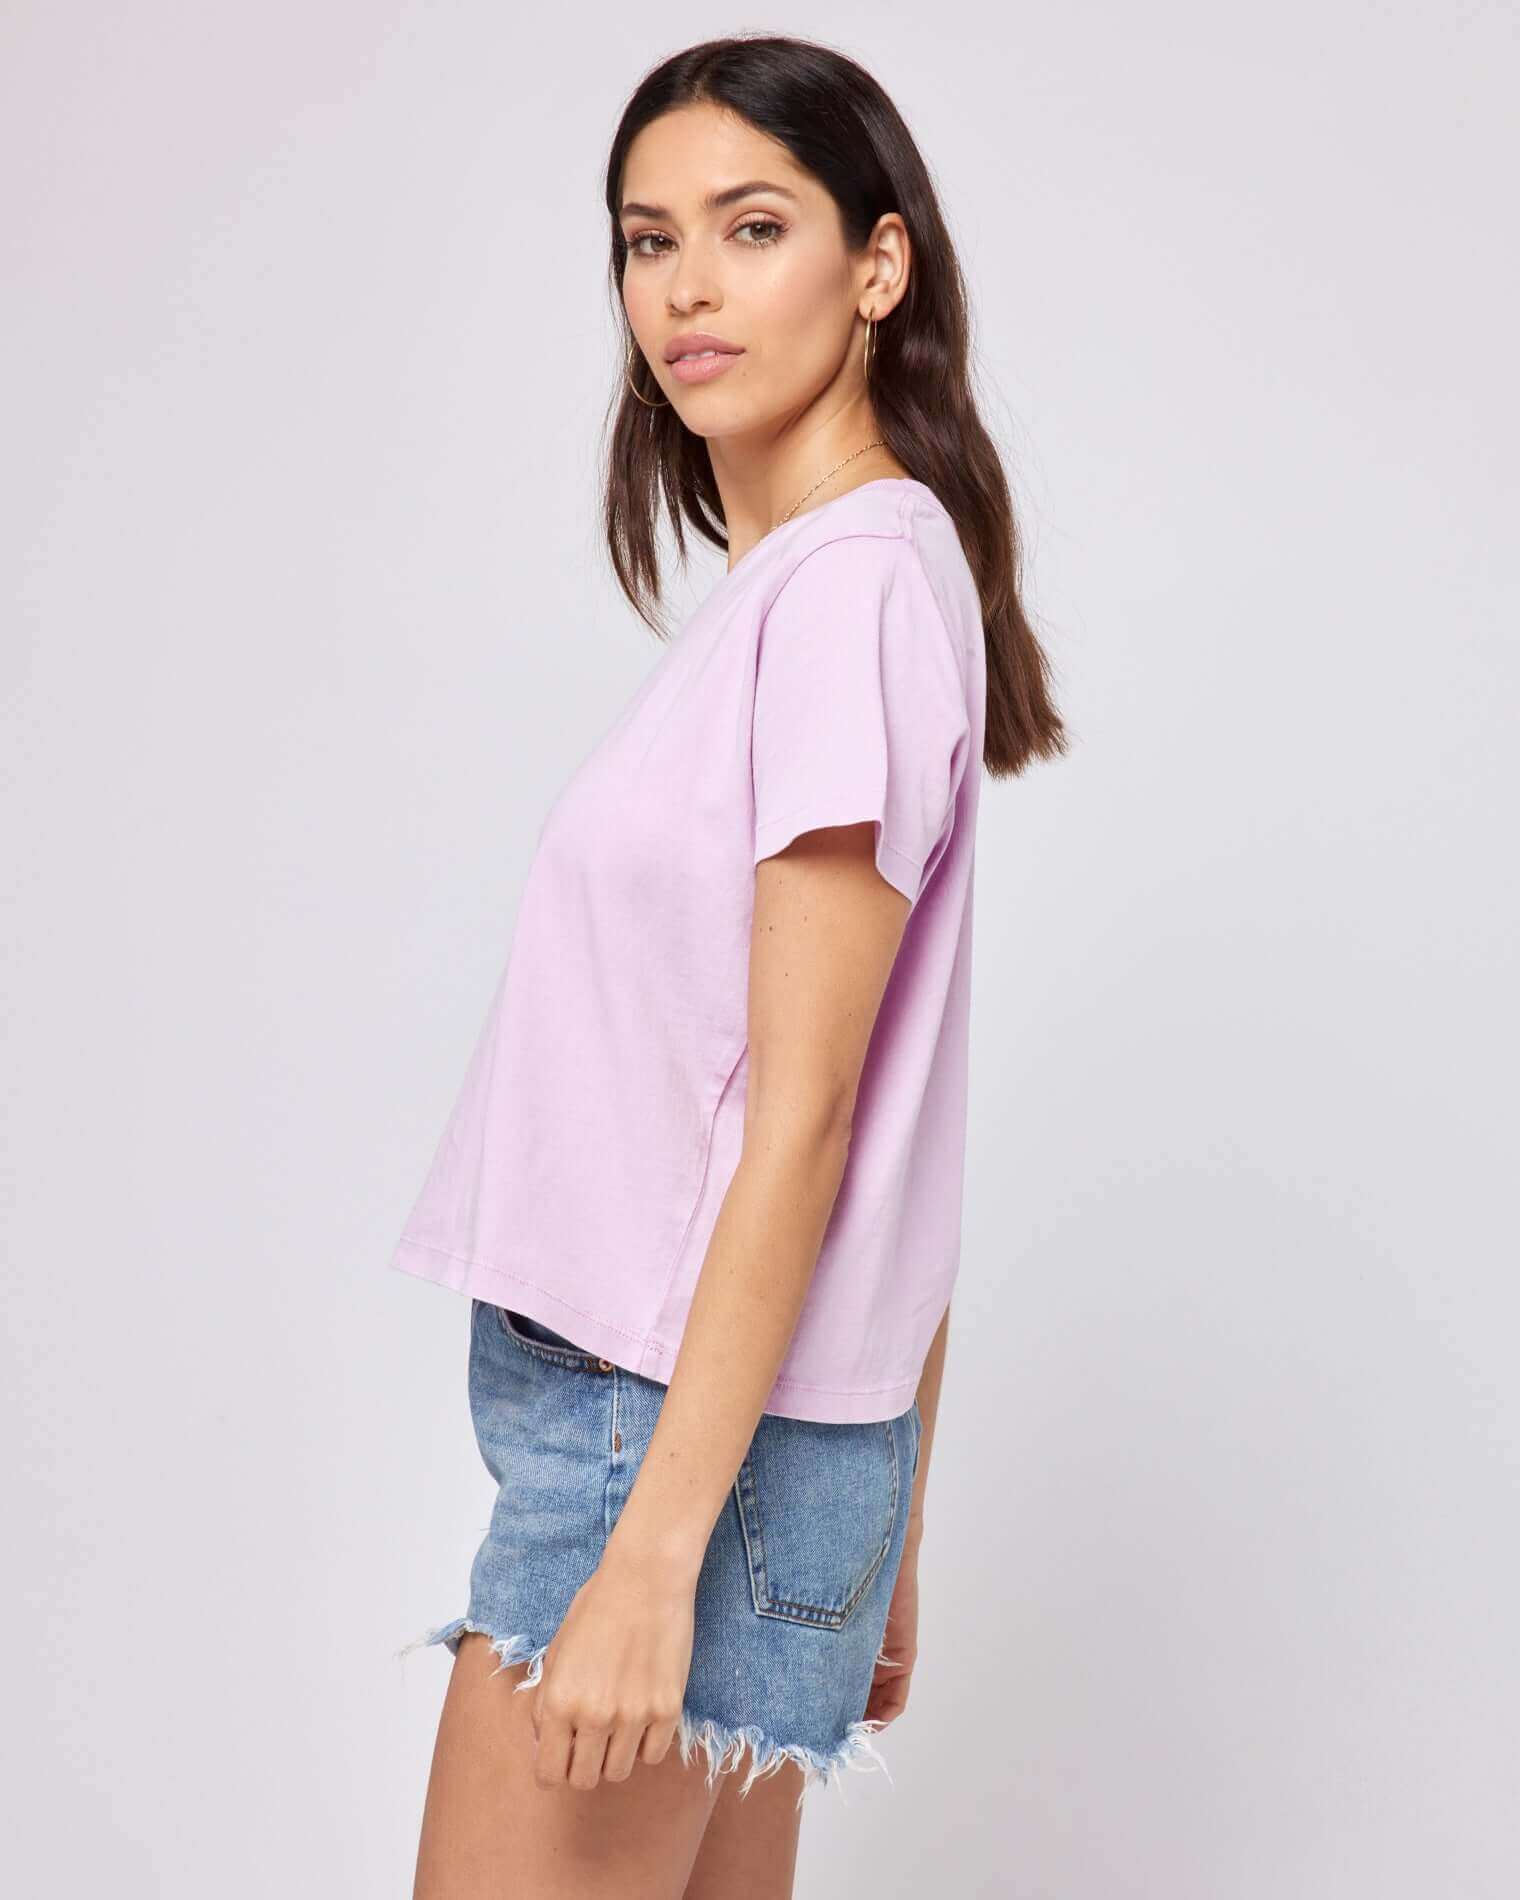 LSpace All Day Top in Lily - Side